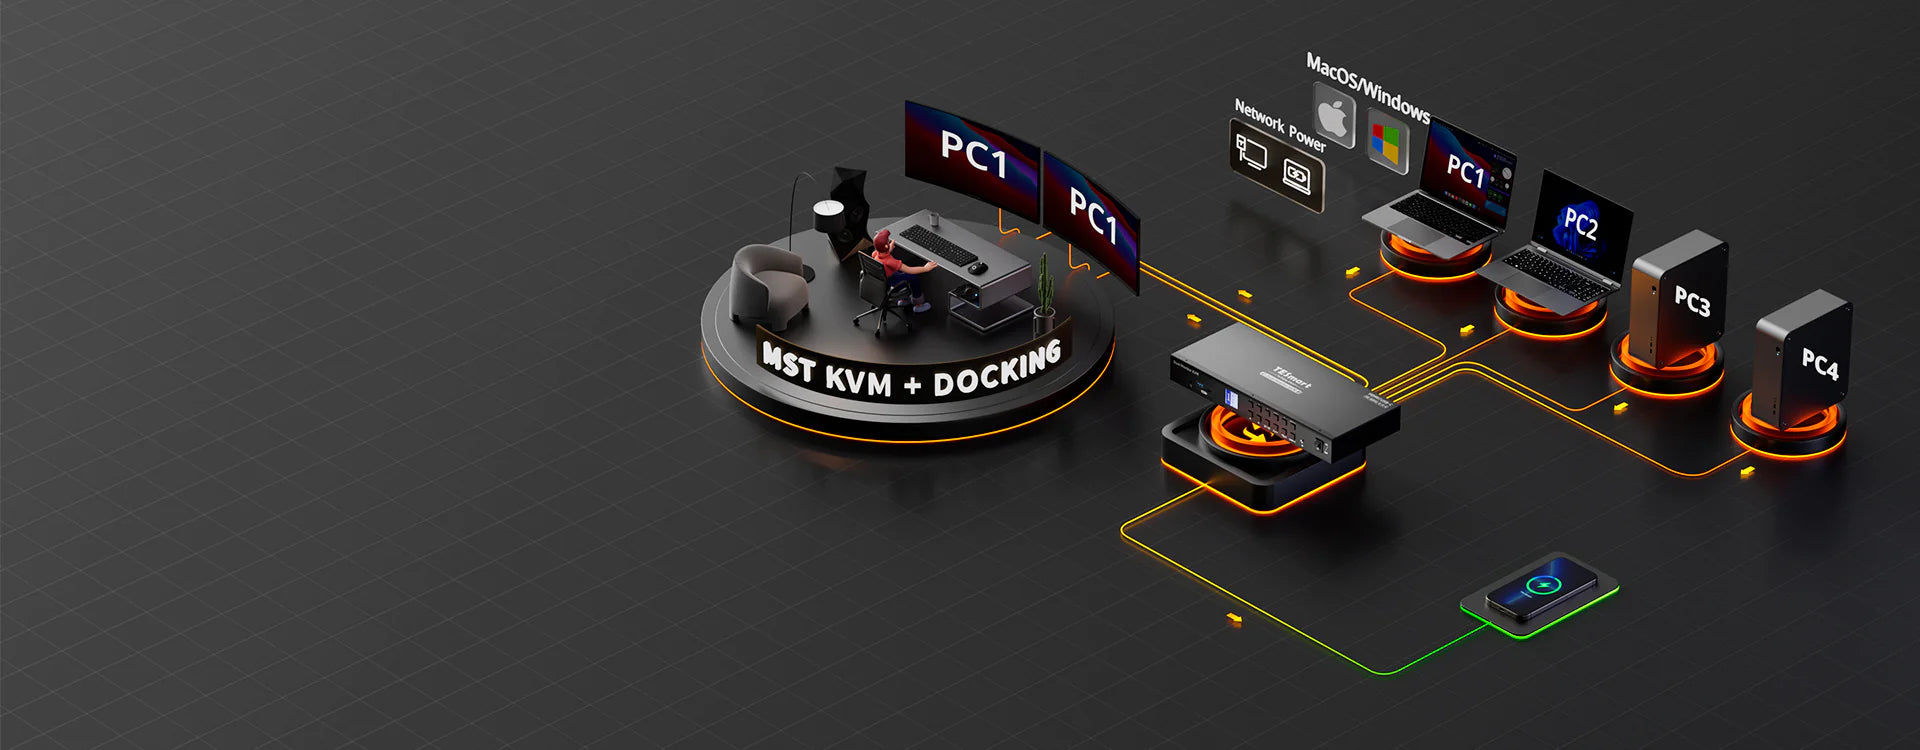 HCK402-P Dual-Screen MST KVM Switch: A Vanguard of Office Efficiency